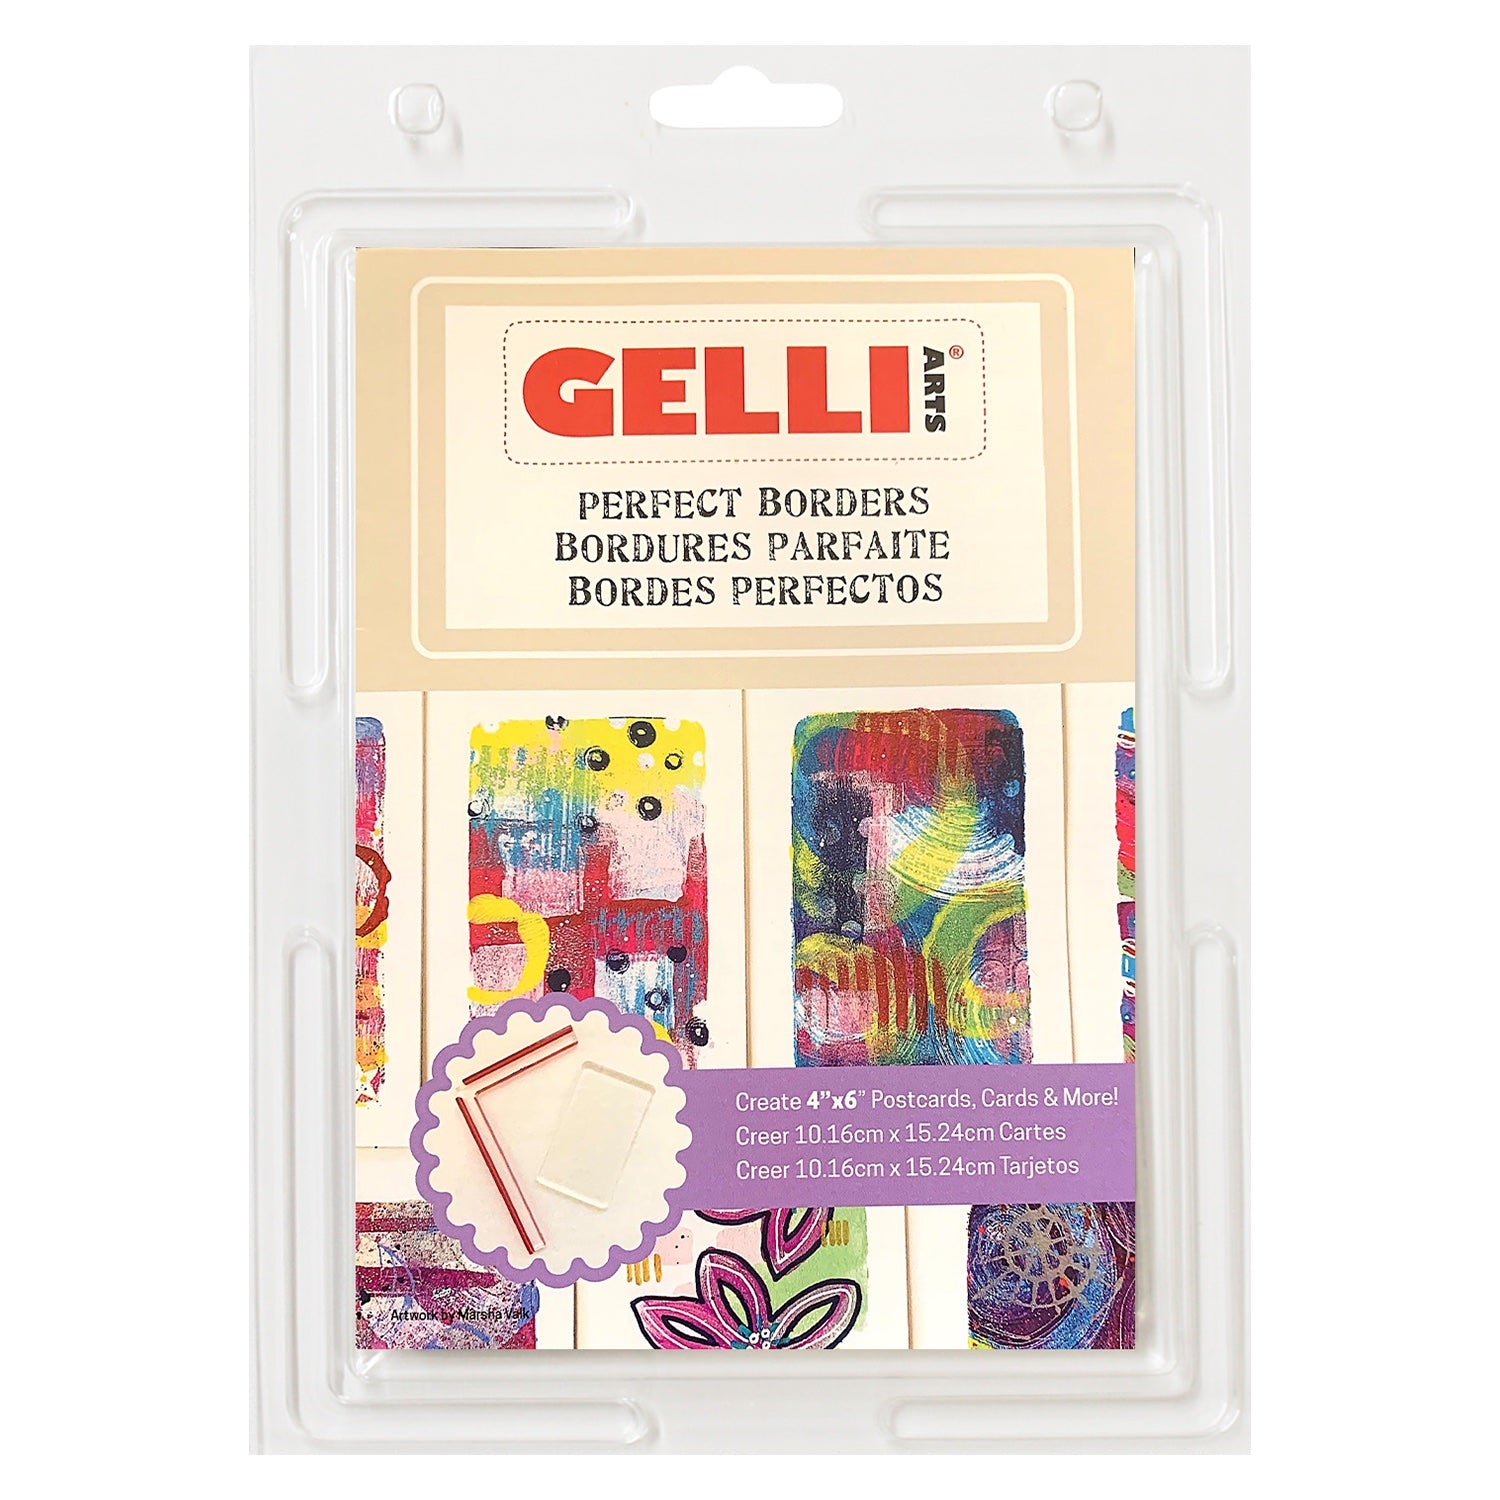 How to Use a Gelli Plate - Gel Print Basics - Intro to Gel Plate